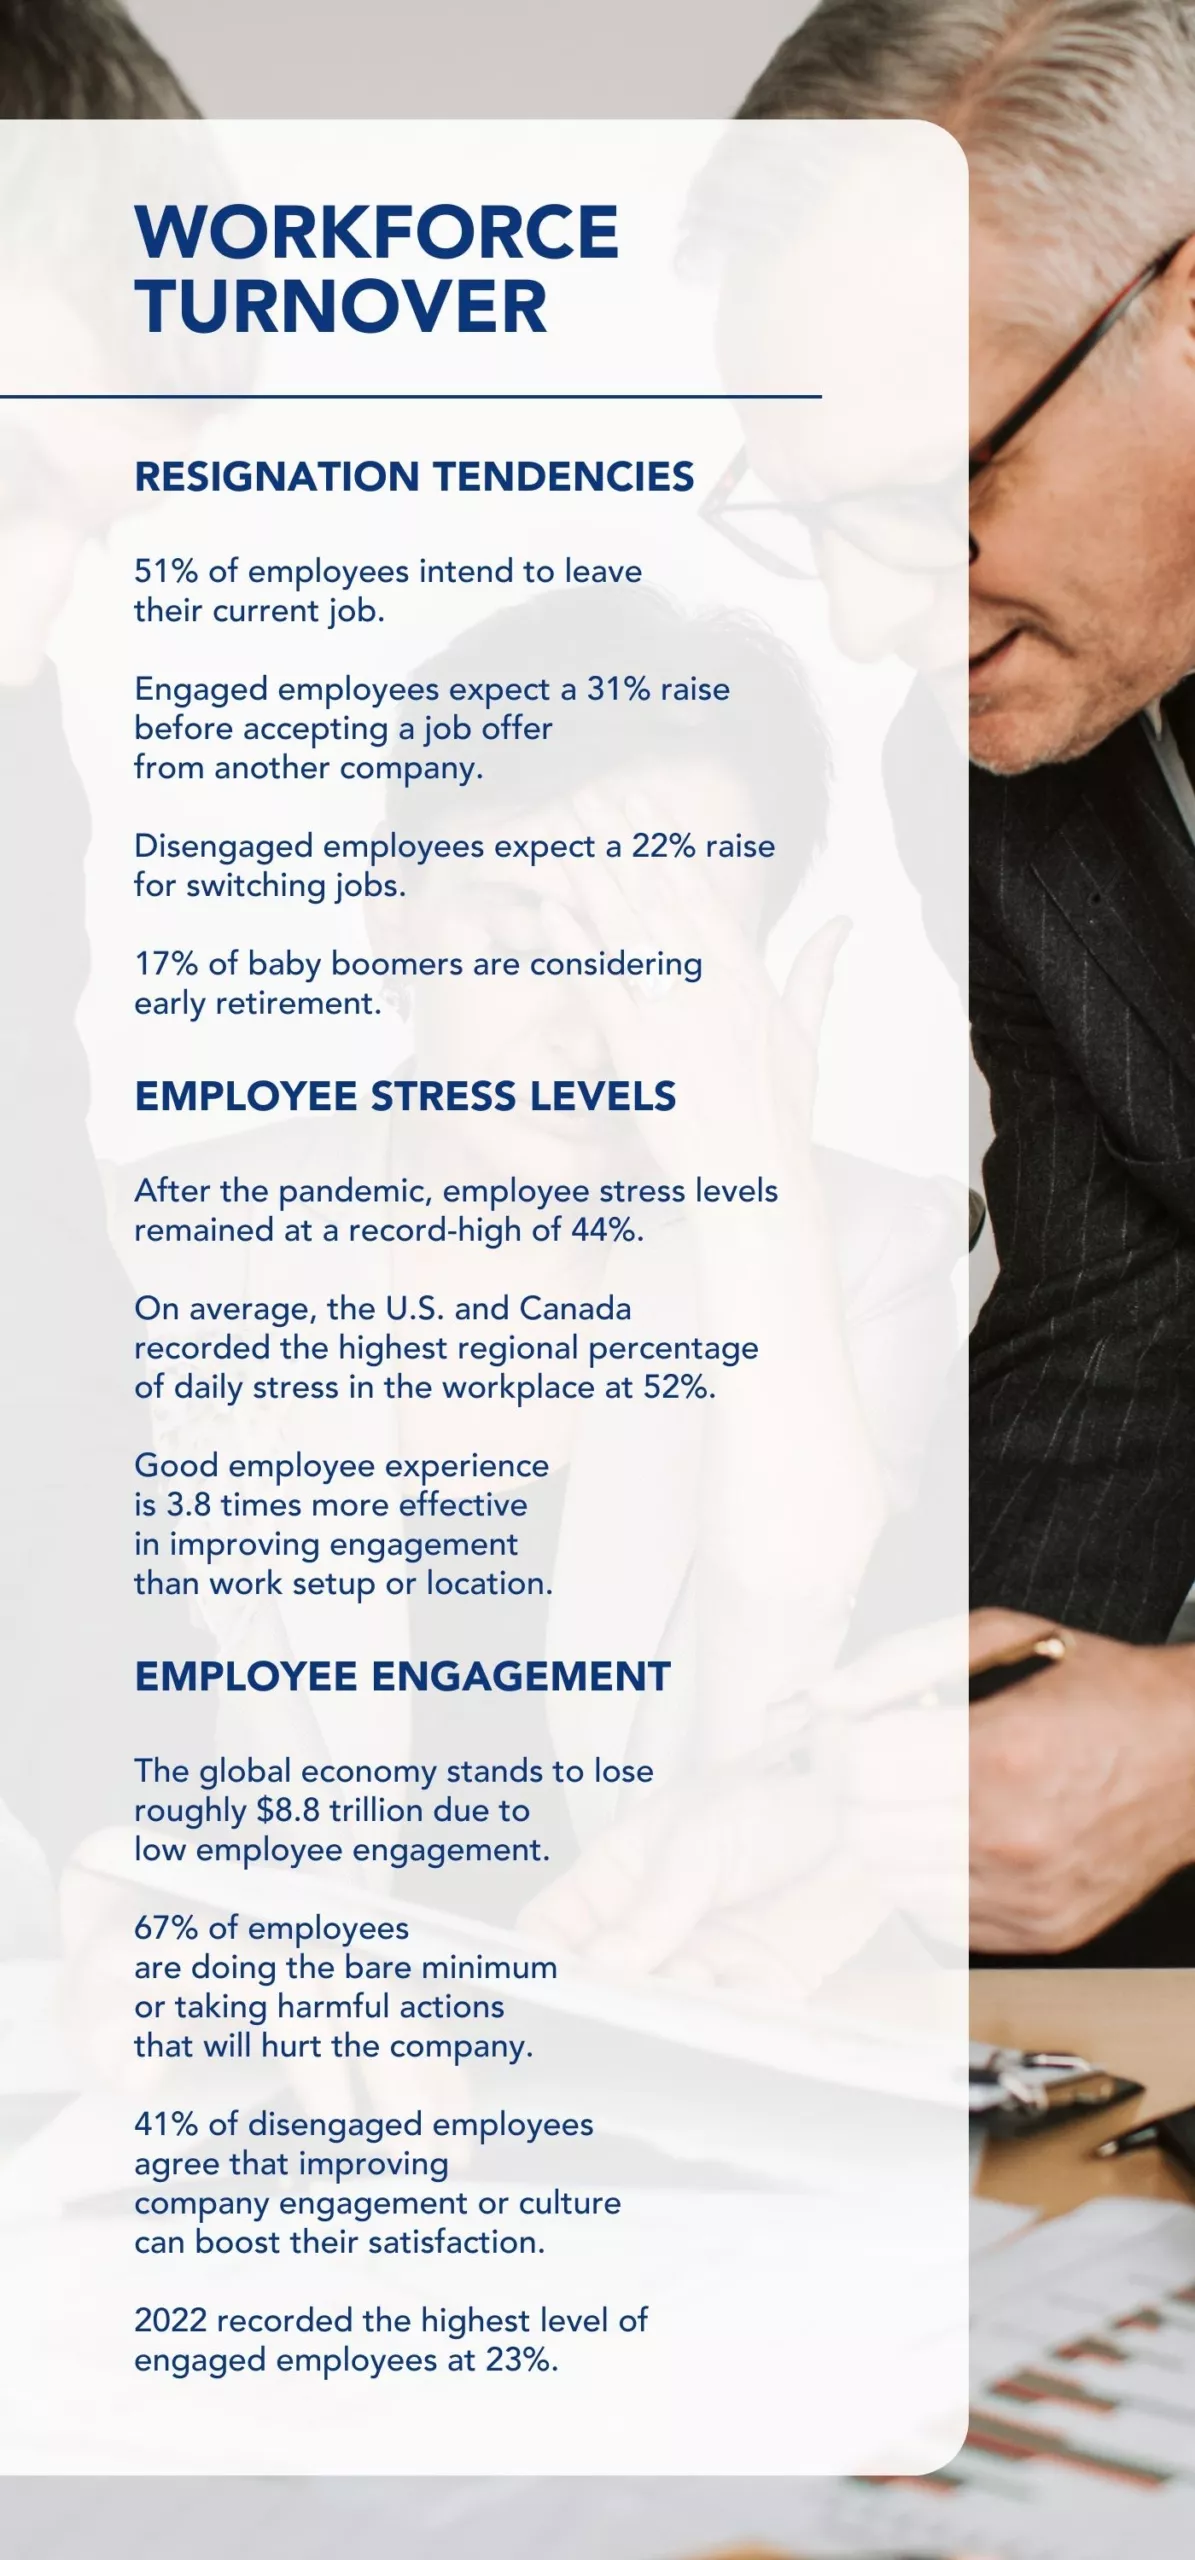 An infographic shows statistics on workforce turnover as it shapes HR outsourcing trends of today.